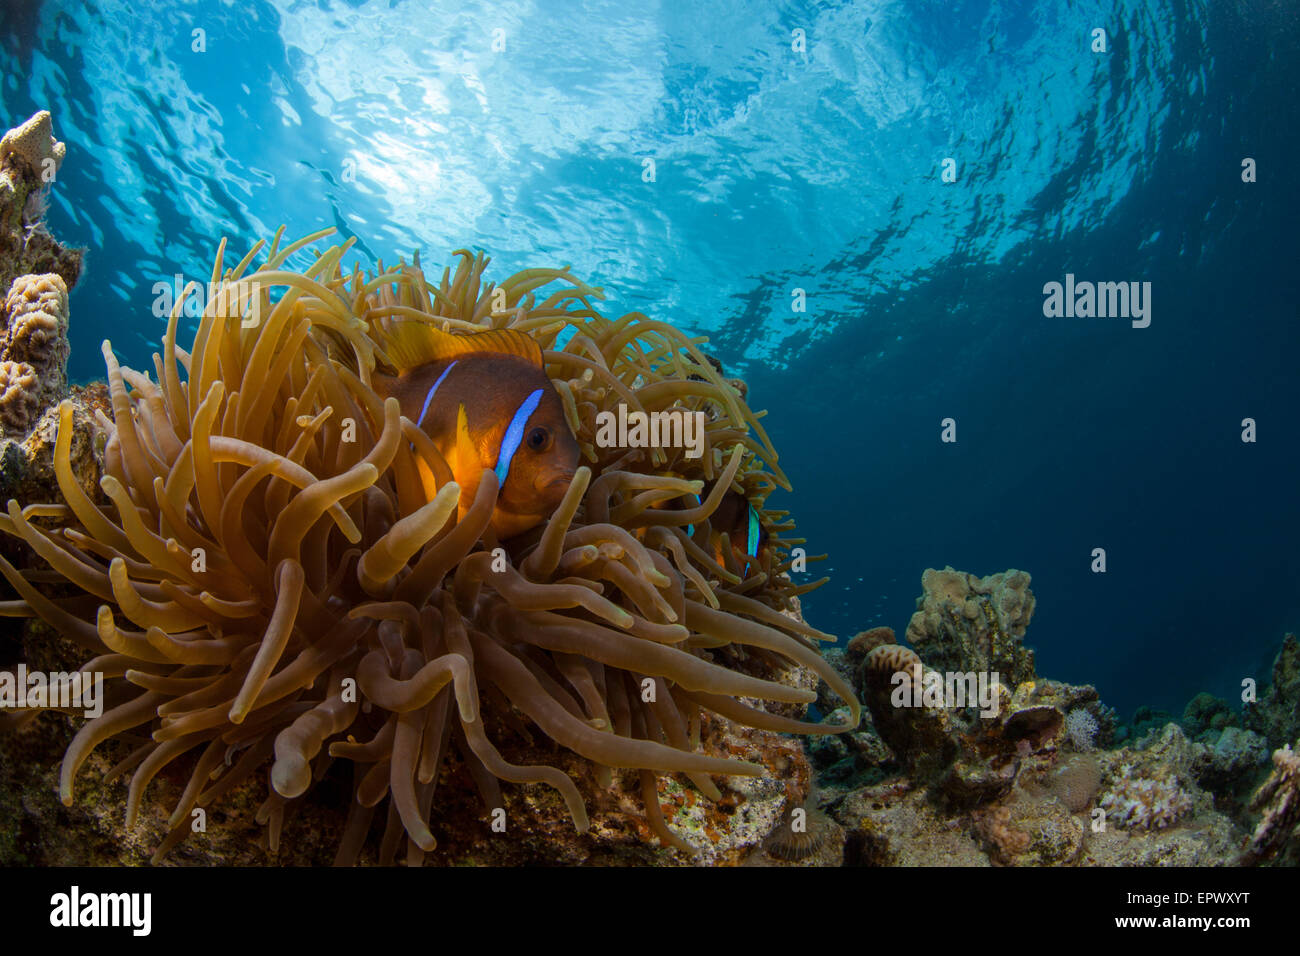 Anemone and Anemonefish, sun ball is in the background Stock Photo